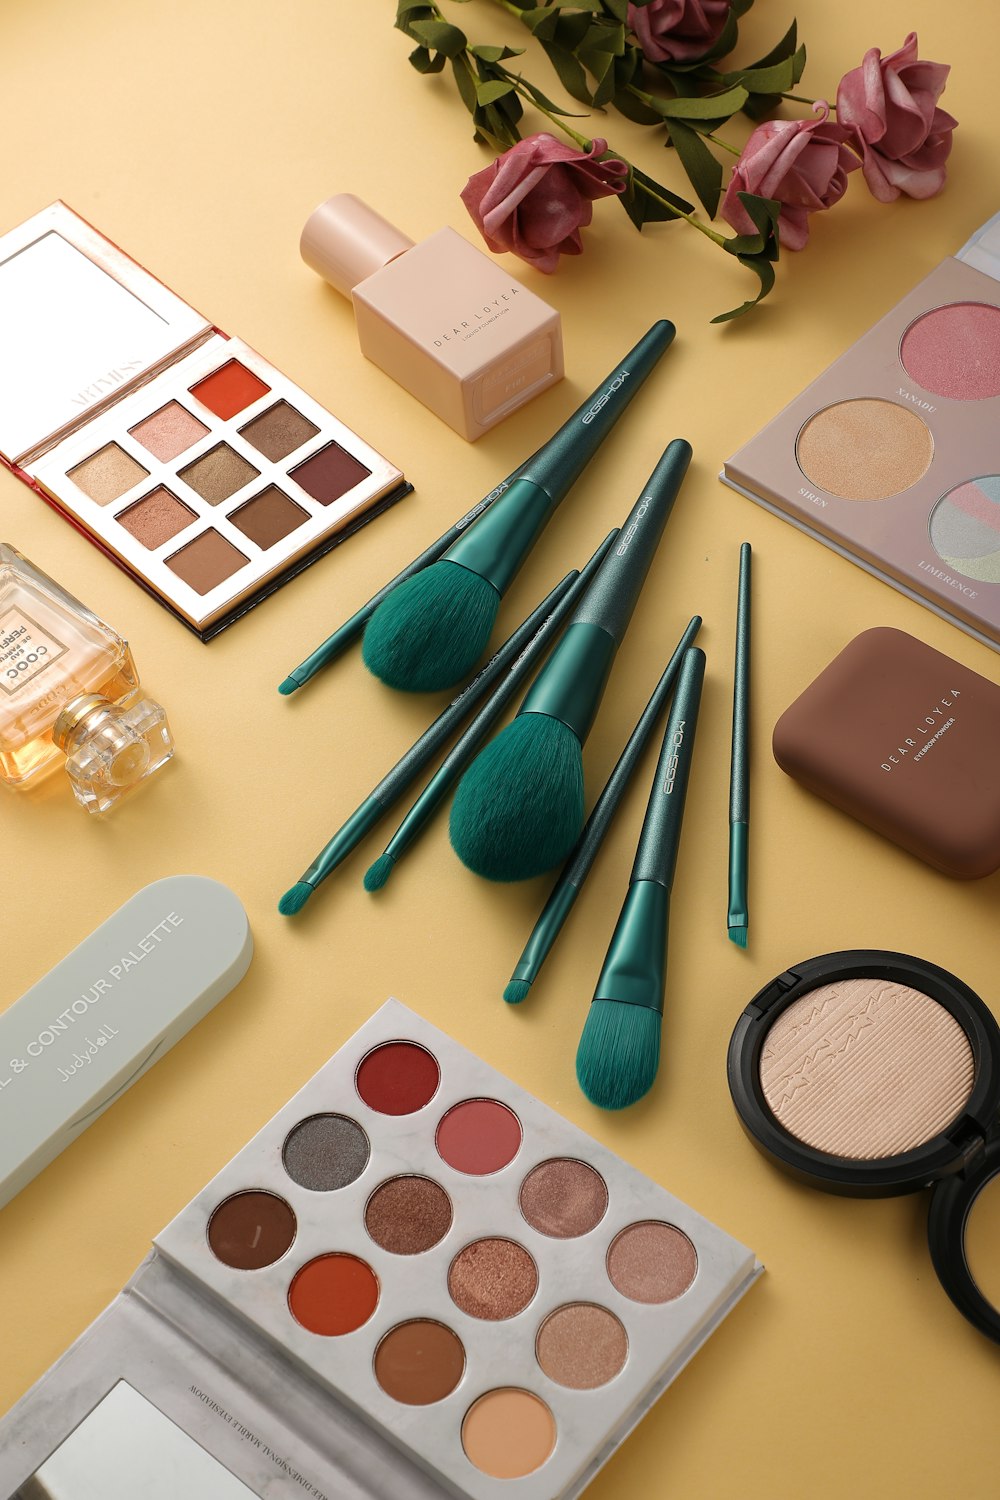 a collection of makeup and cosmetics on a table